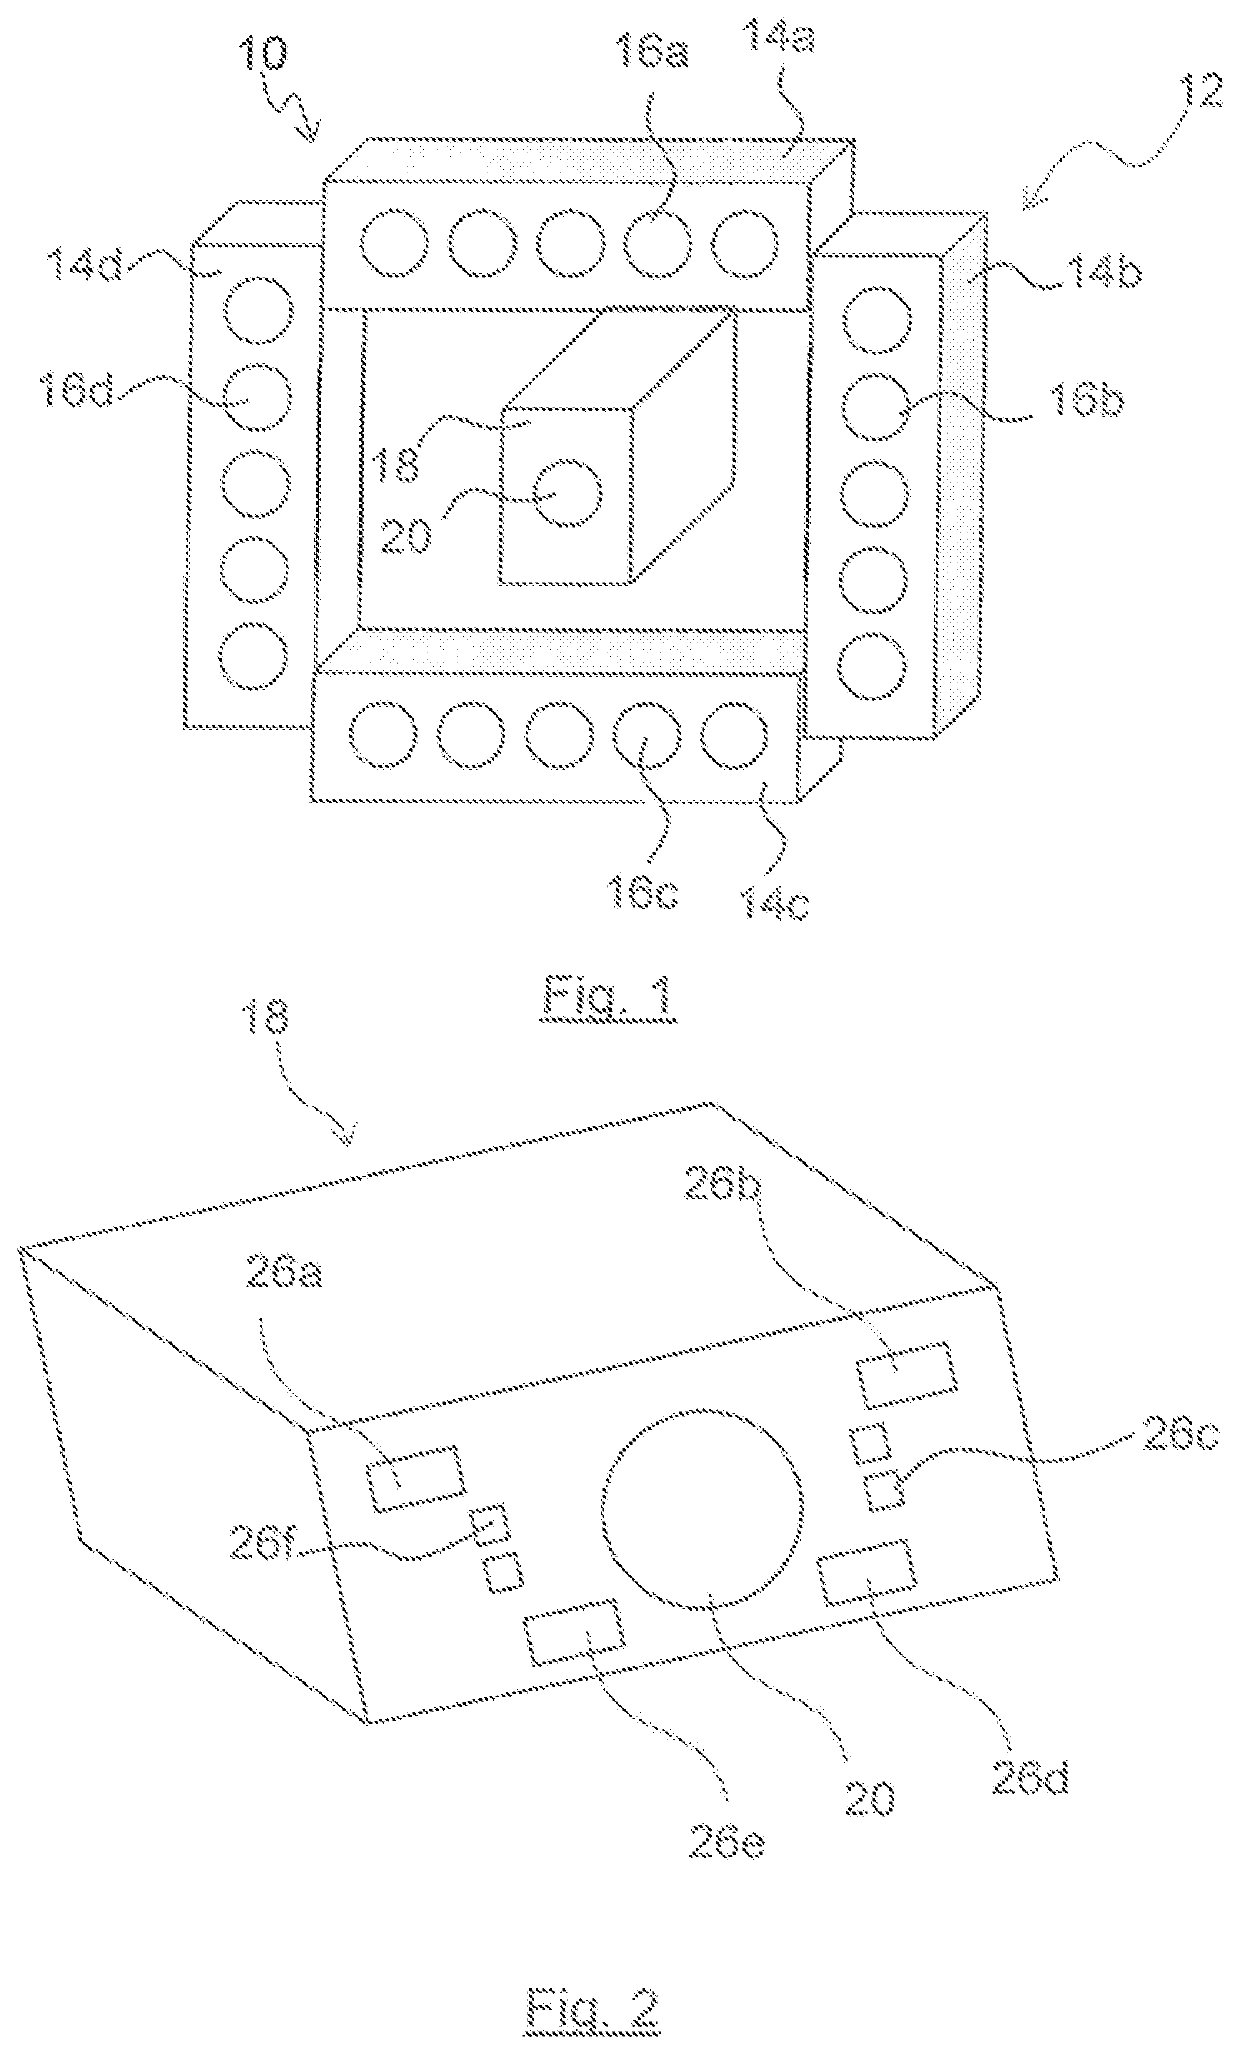 Control interface for a machine-vision lighting device